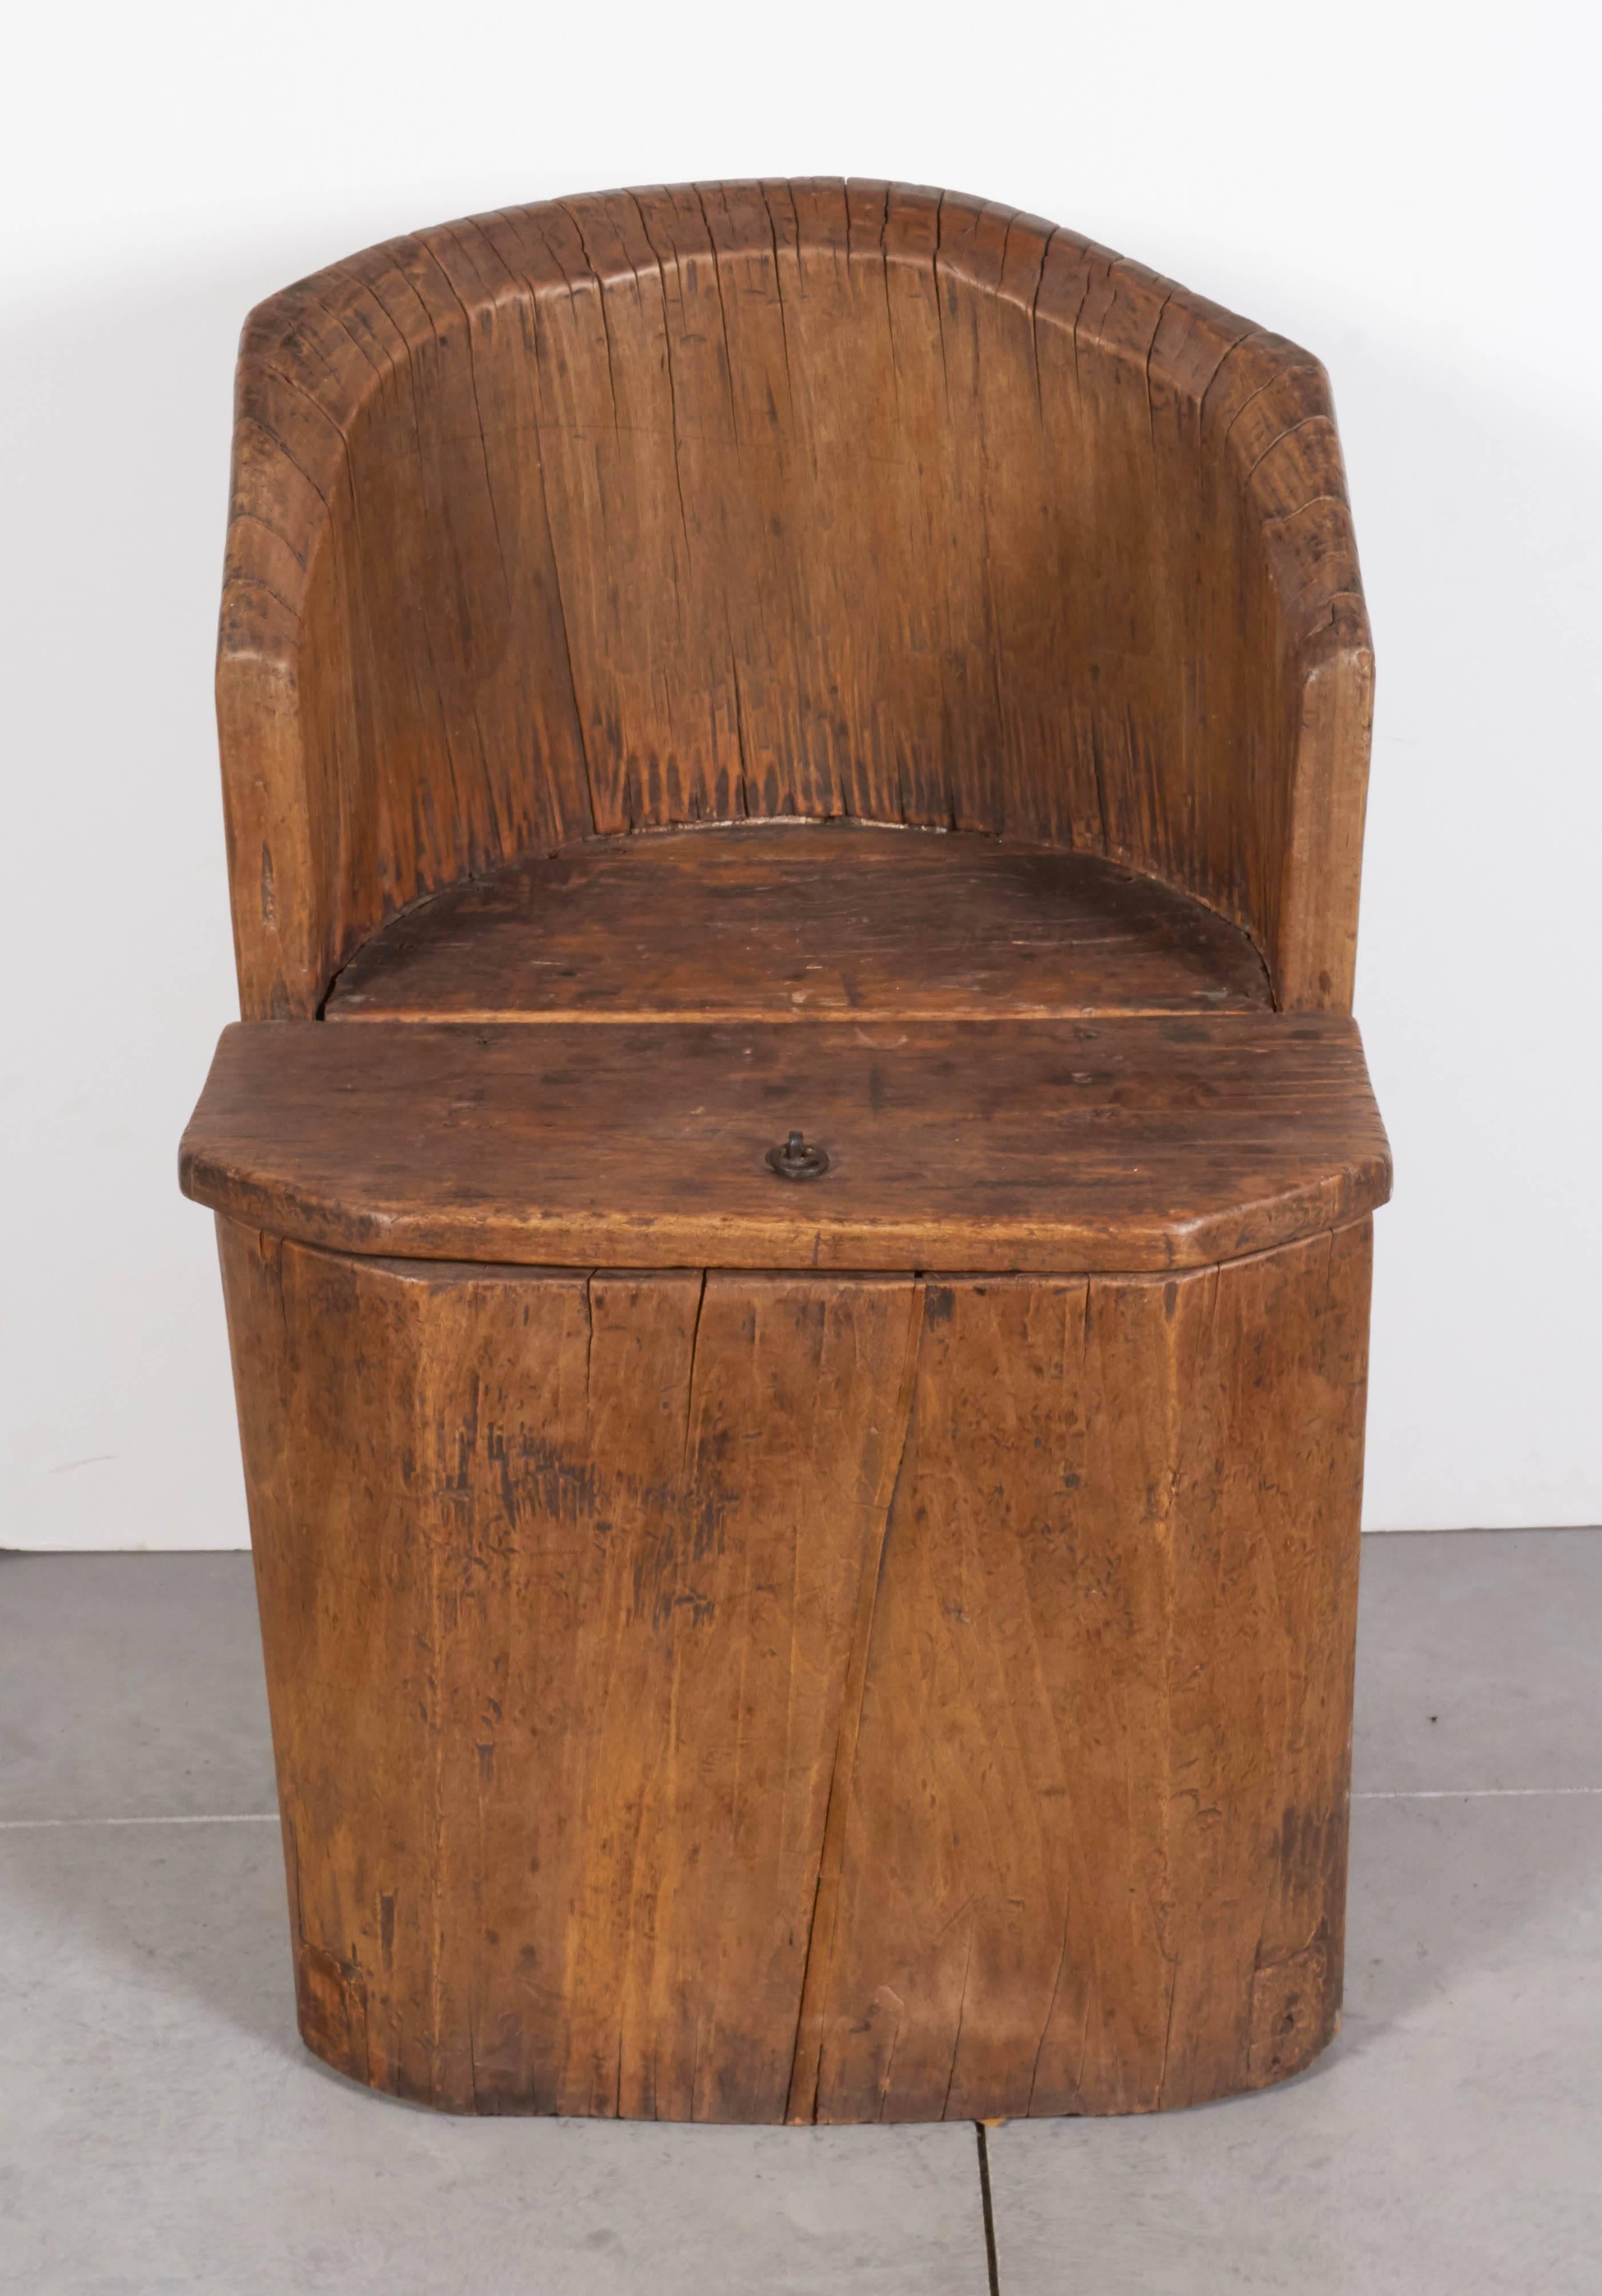 An unusual antique Chinese money chair carved out of a single piece of poplar wood. This heavy chair was used for the storage of money protected by the person sitting on it. Other than the lift off seat to give access to the hollow interior, this